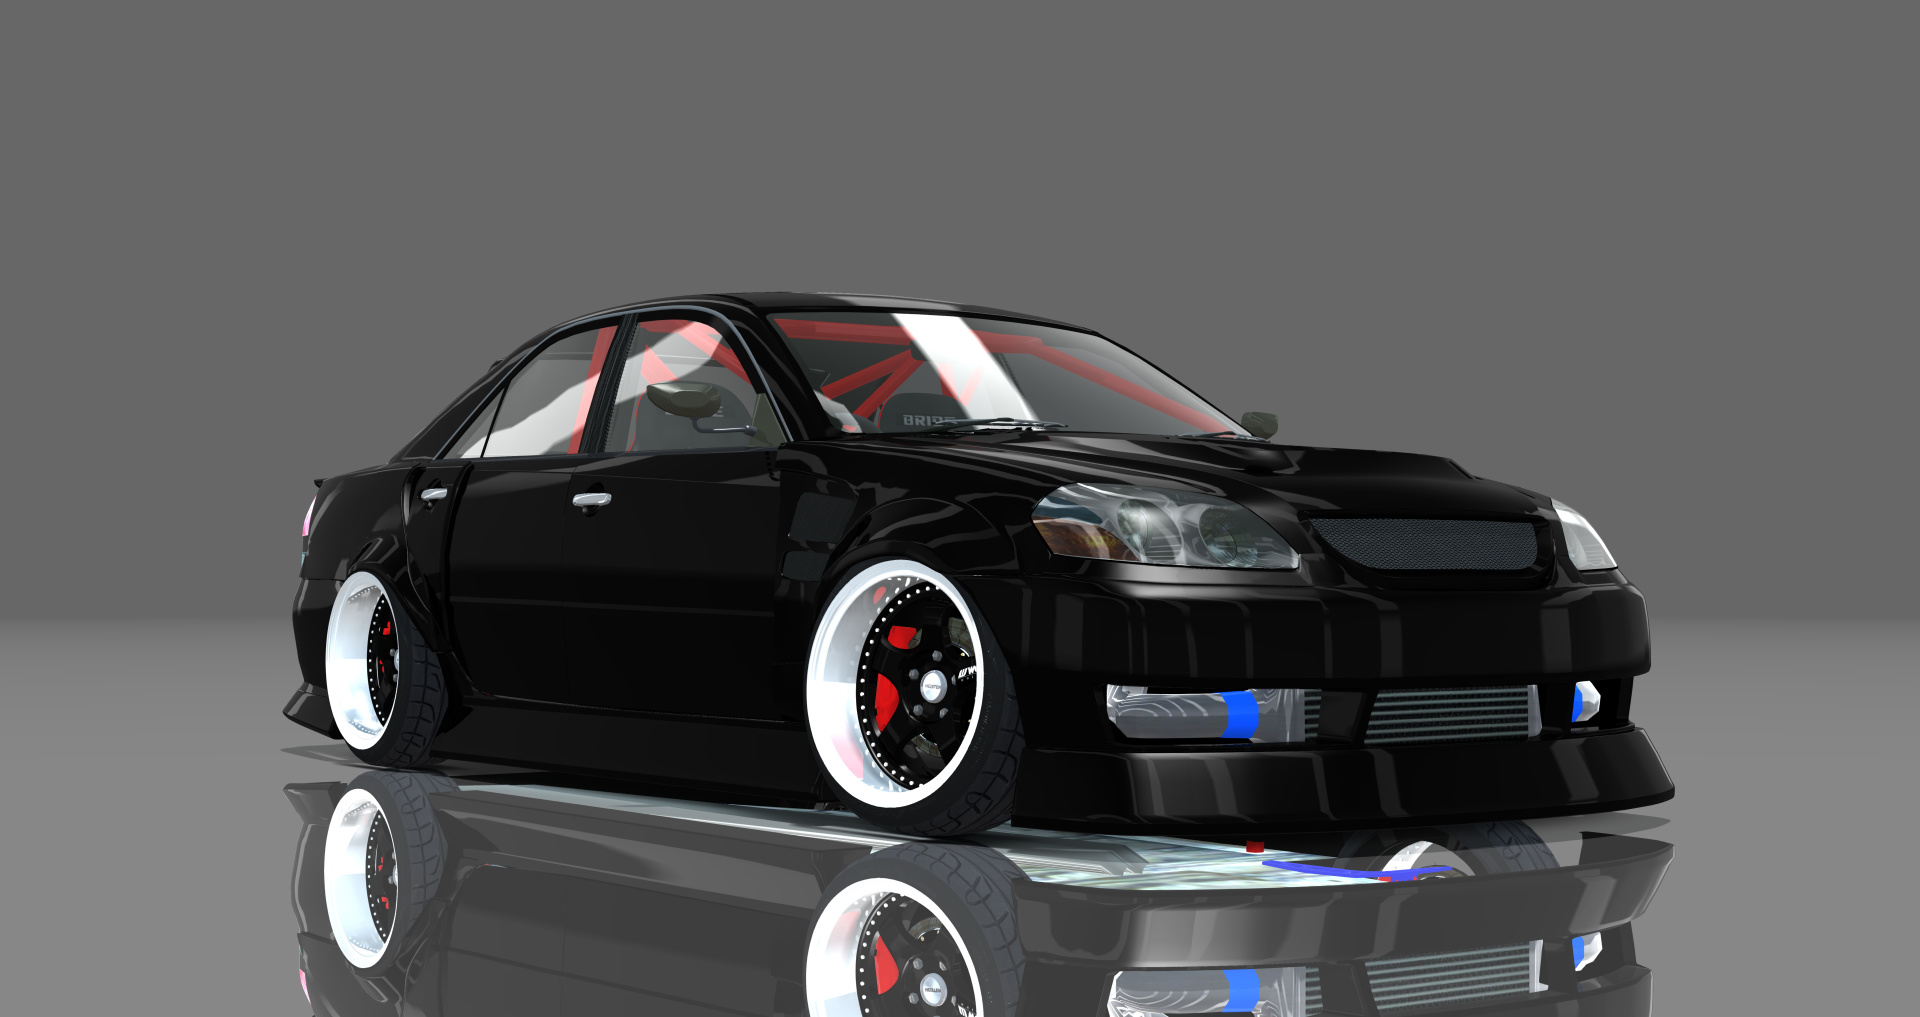 DTP Toyota JZX110 Mark2 Preview Image